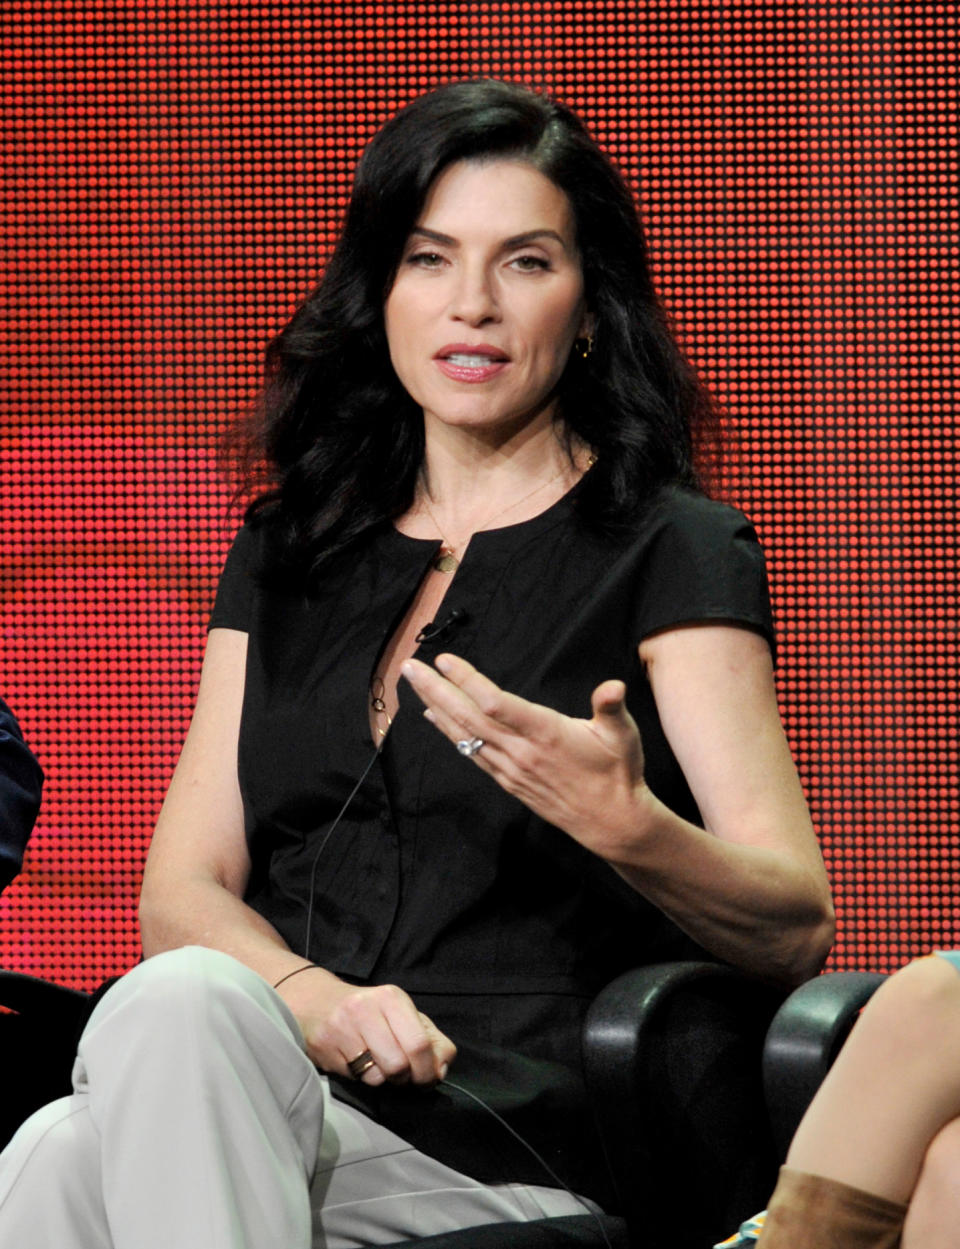 Julianna Margulies participates in "The Good Wife" panel at the CBS Summer TCA on Monday, July 29, 2013, at the Beverly Hilton hotel in Beverly Hills, Calif. (Photo by Chris Pizzello/Invision/AP)